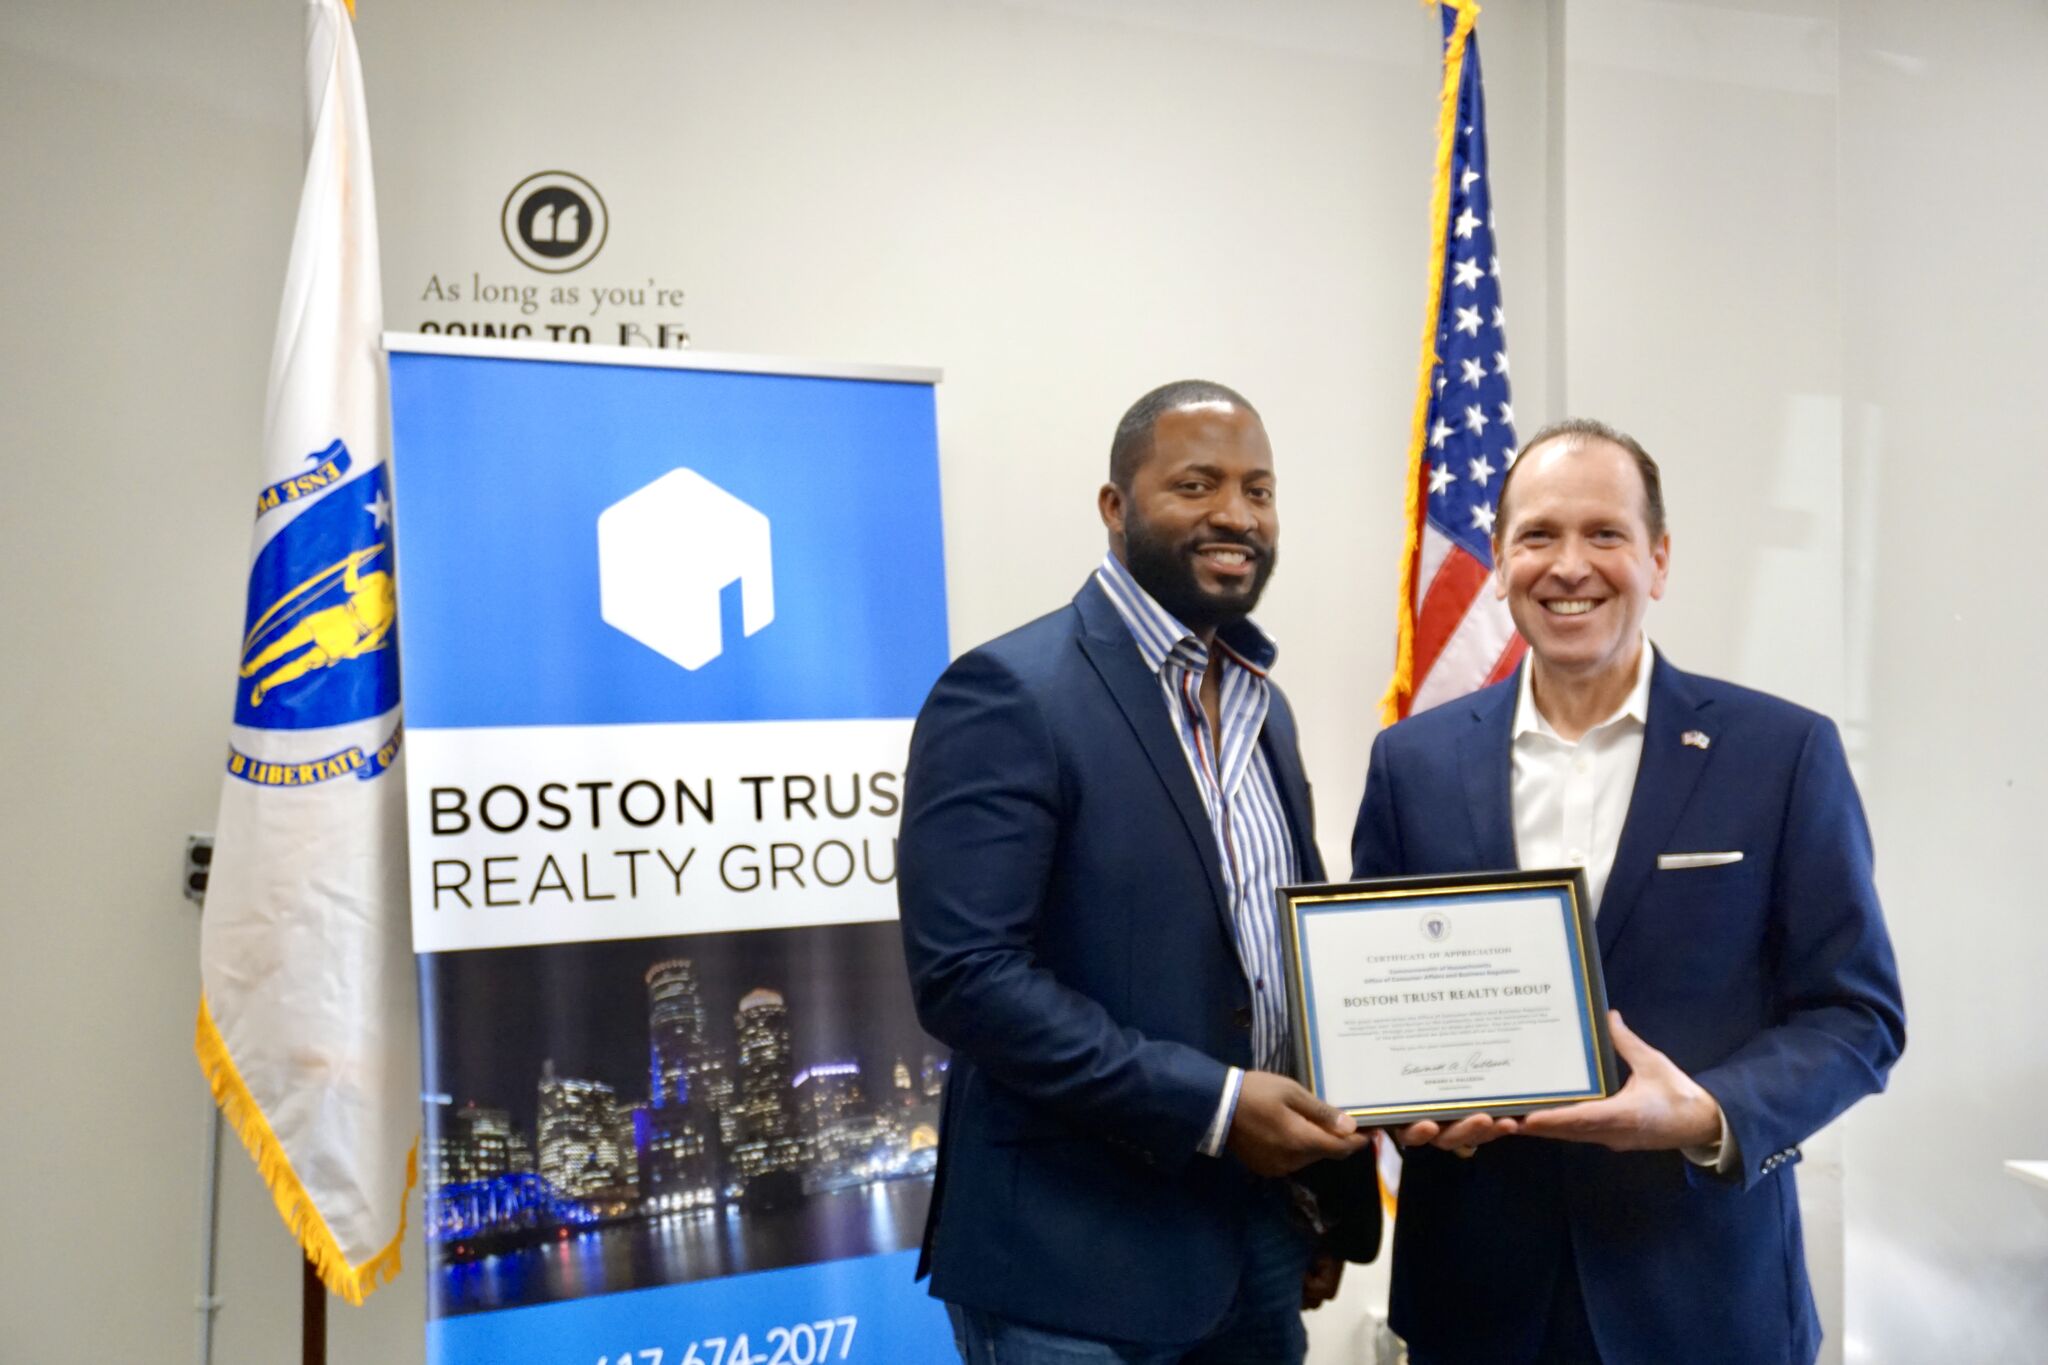 Pictured left to right: Boston Trust Realty Group Owner Robert Nichols and Undersecretary Edward Palleschi.